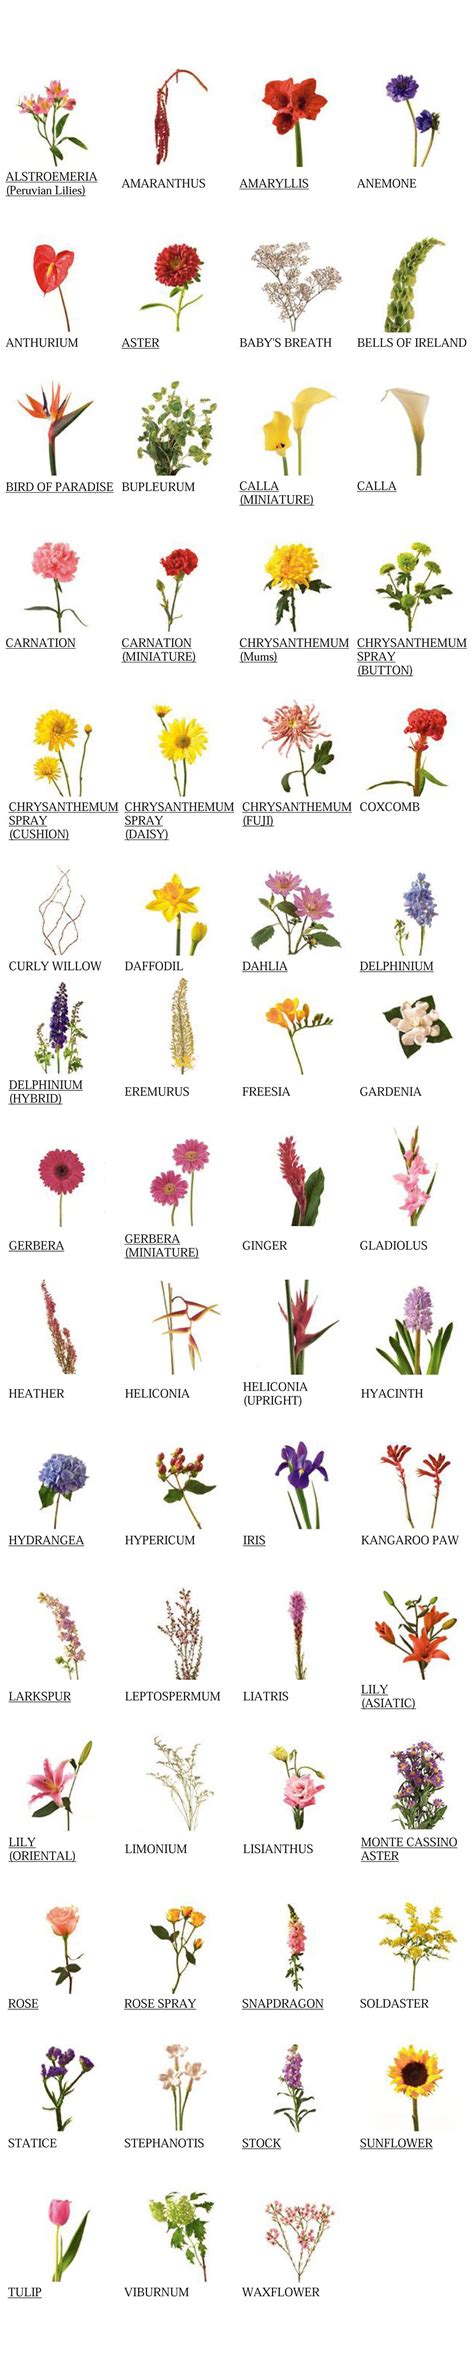 List Of Flower Names And Pictures